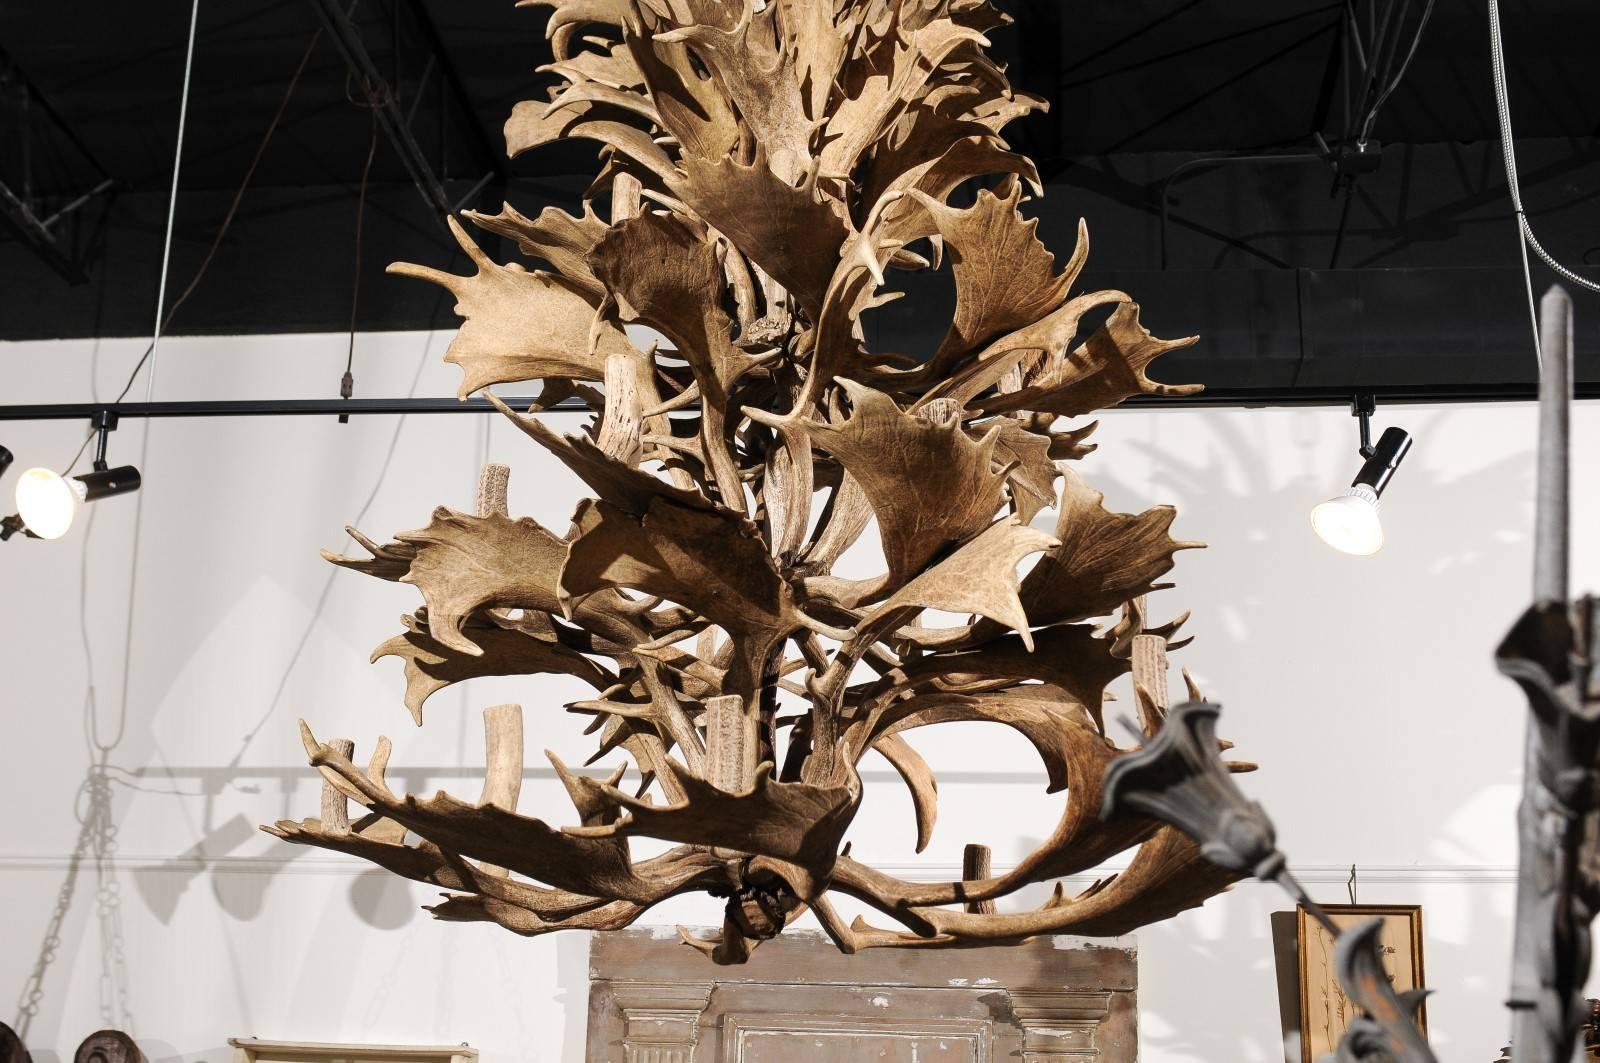 Naturally Shed 24-Light Antler Chandelier from the 1940s, Rewired for the US 2